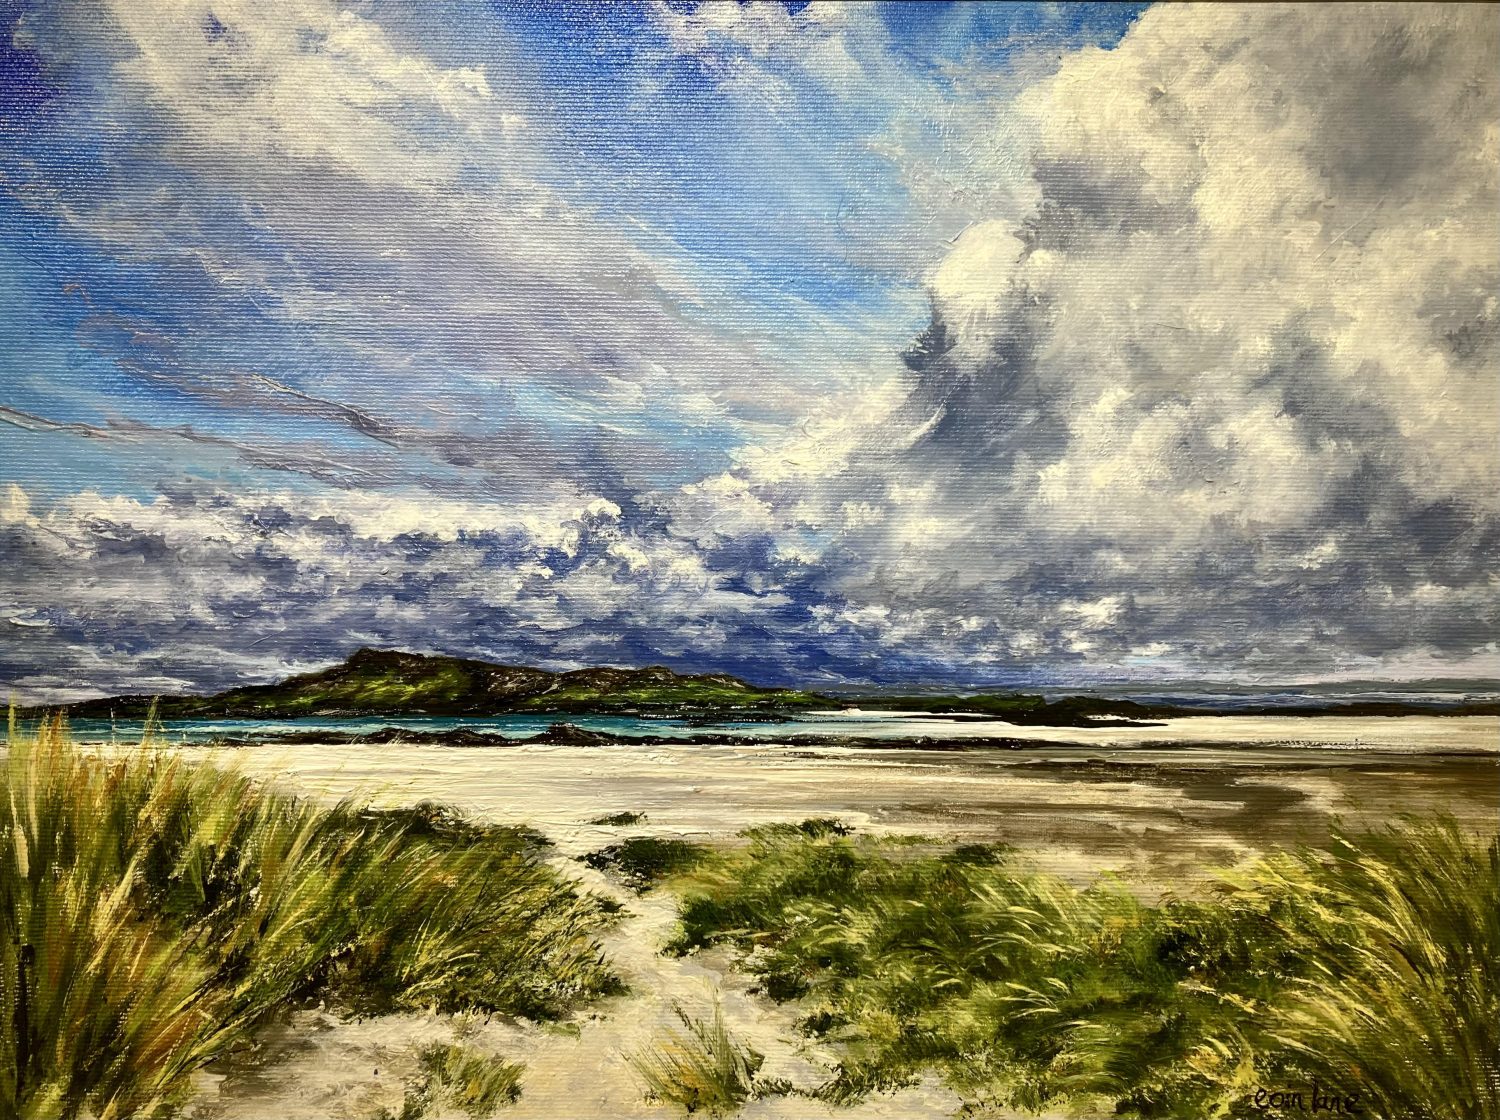 Inishlyon from Dumhach Beach, Inishbofin by Eoin Lane